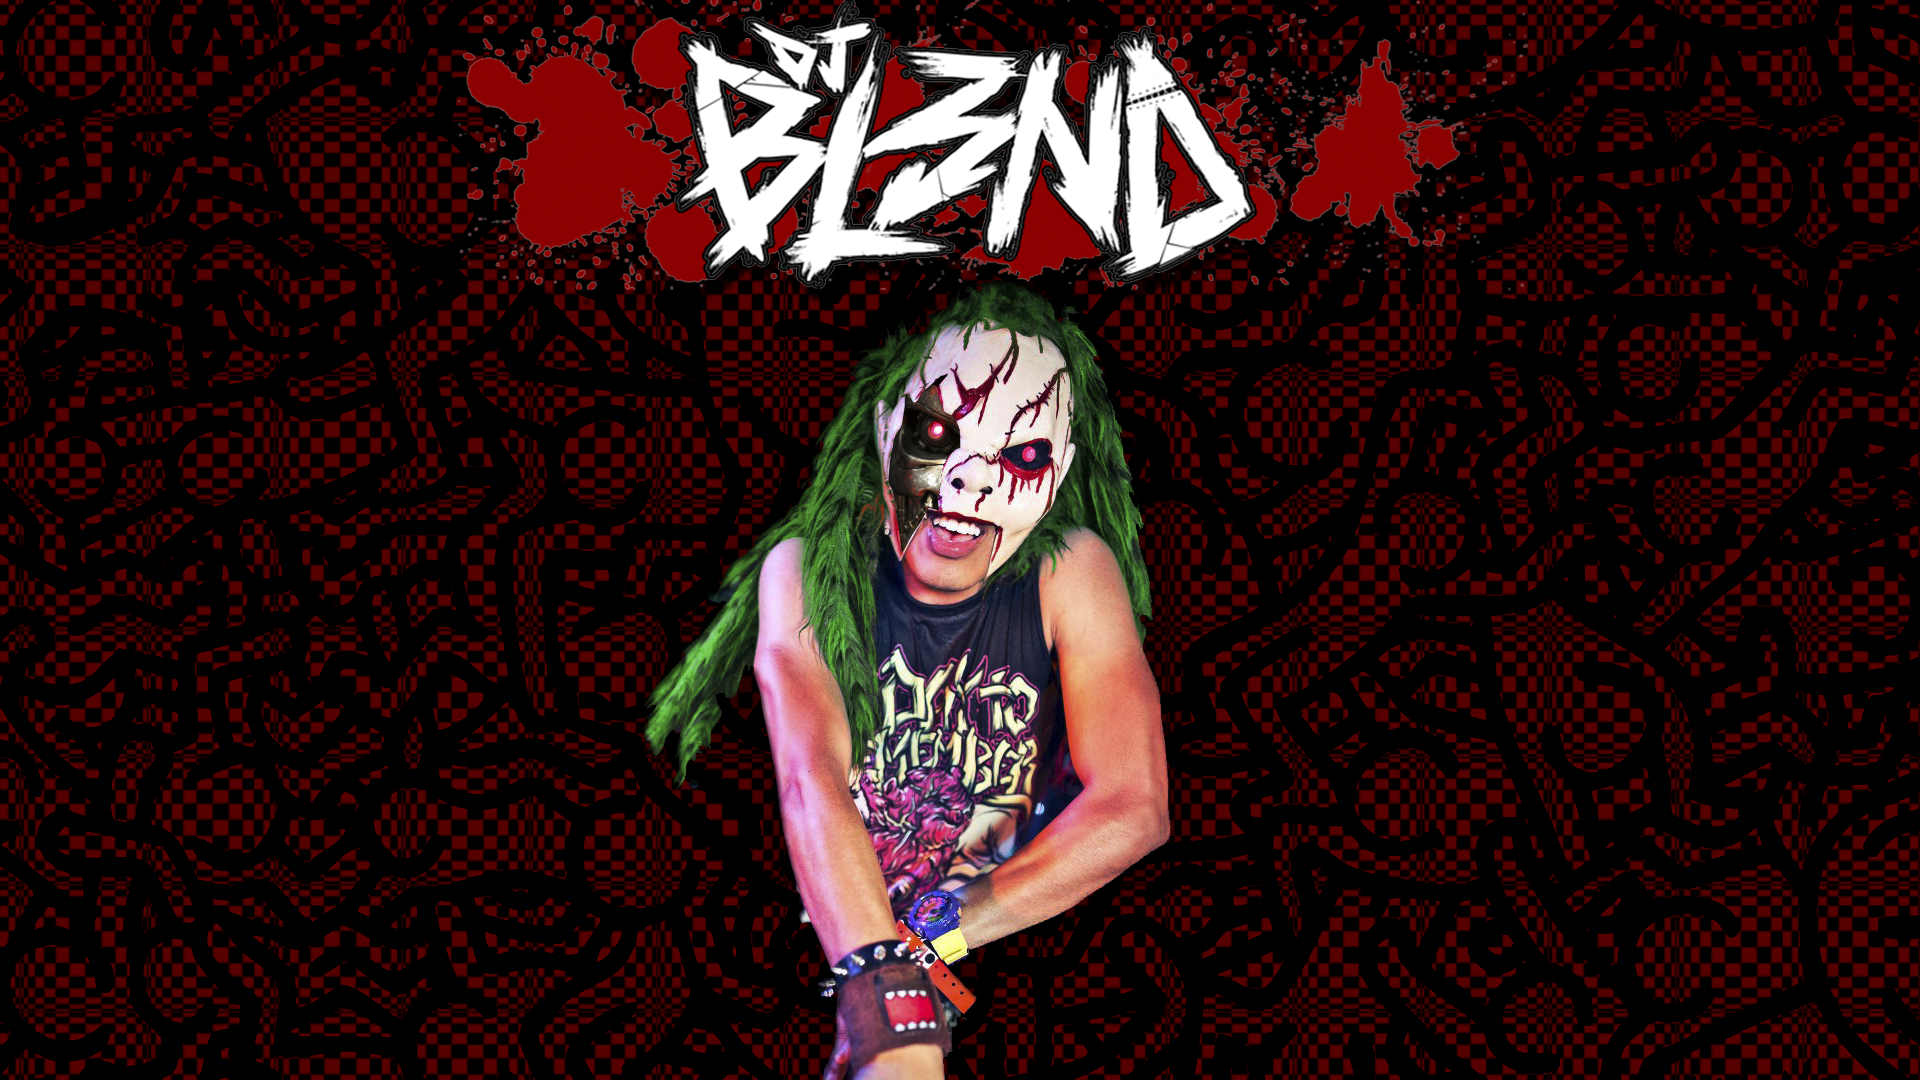 4 DJ BL3ND HD Wallpapers | Backgrounds - Wallpaper Abyss